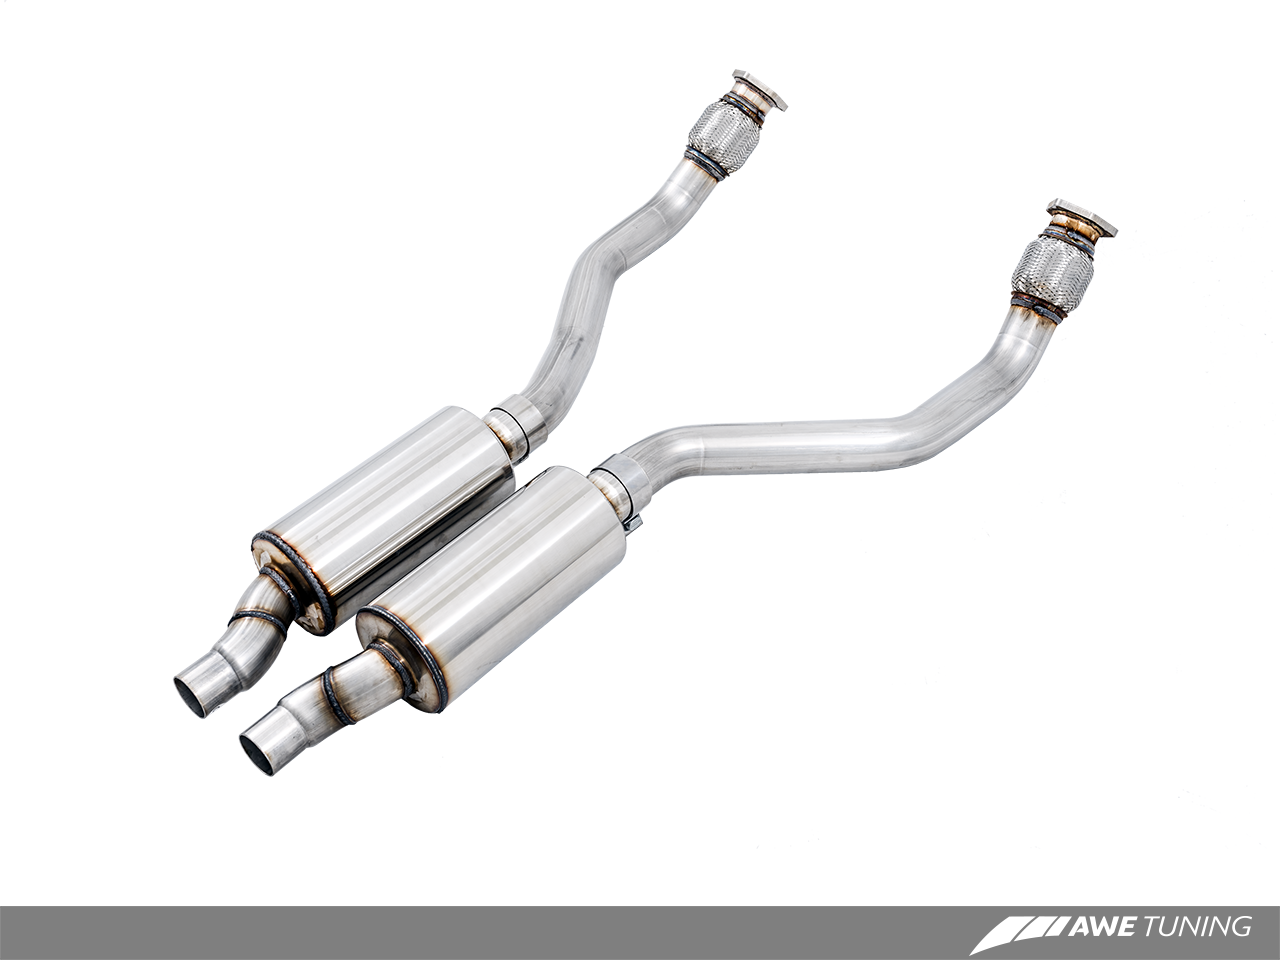 AWE Touring Edition Exhaust for Audi C7 A6 3.0T - Motorsports LA